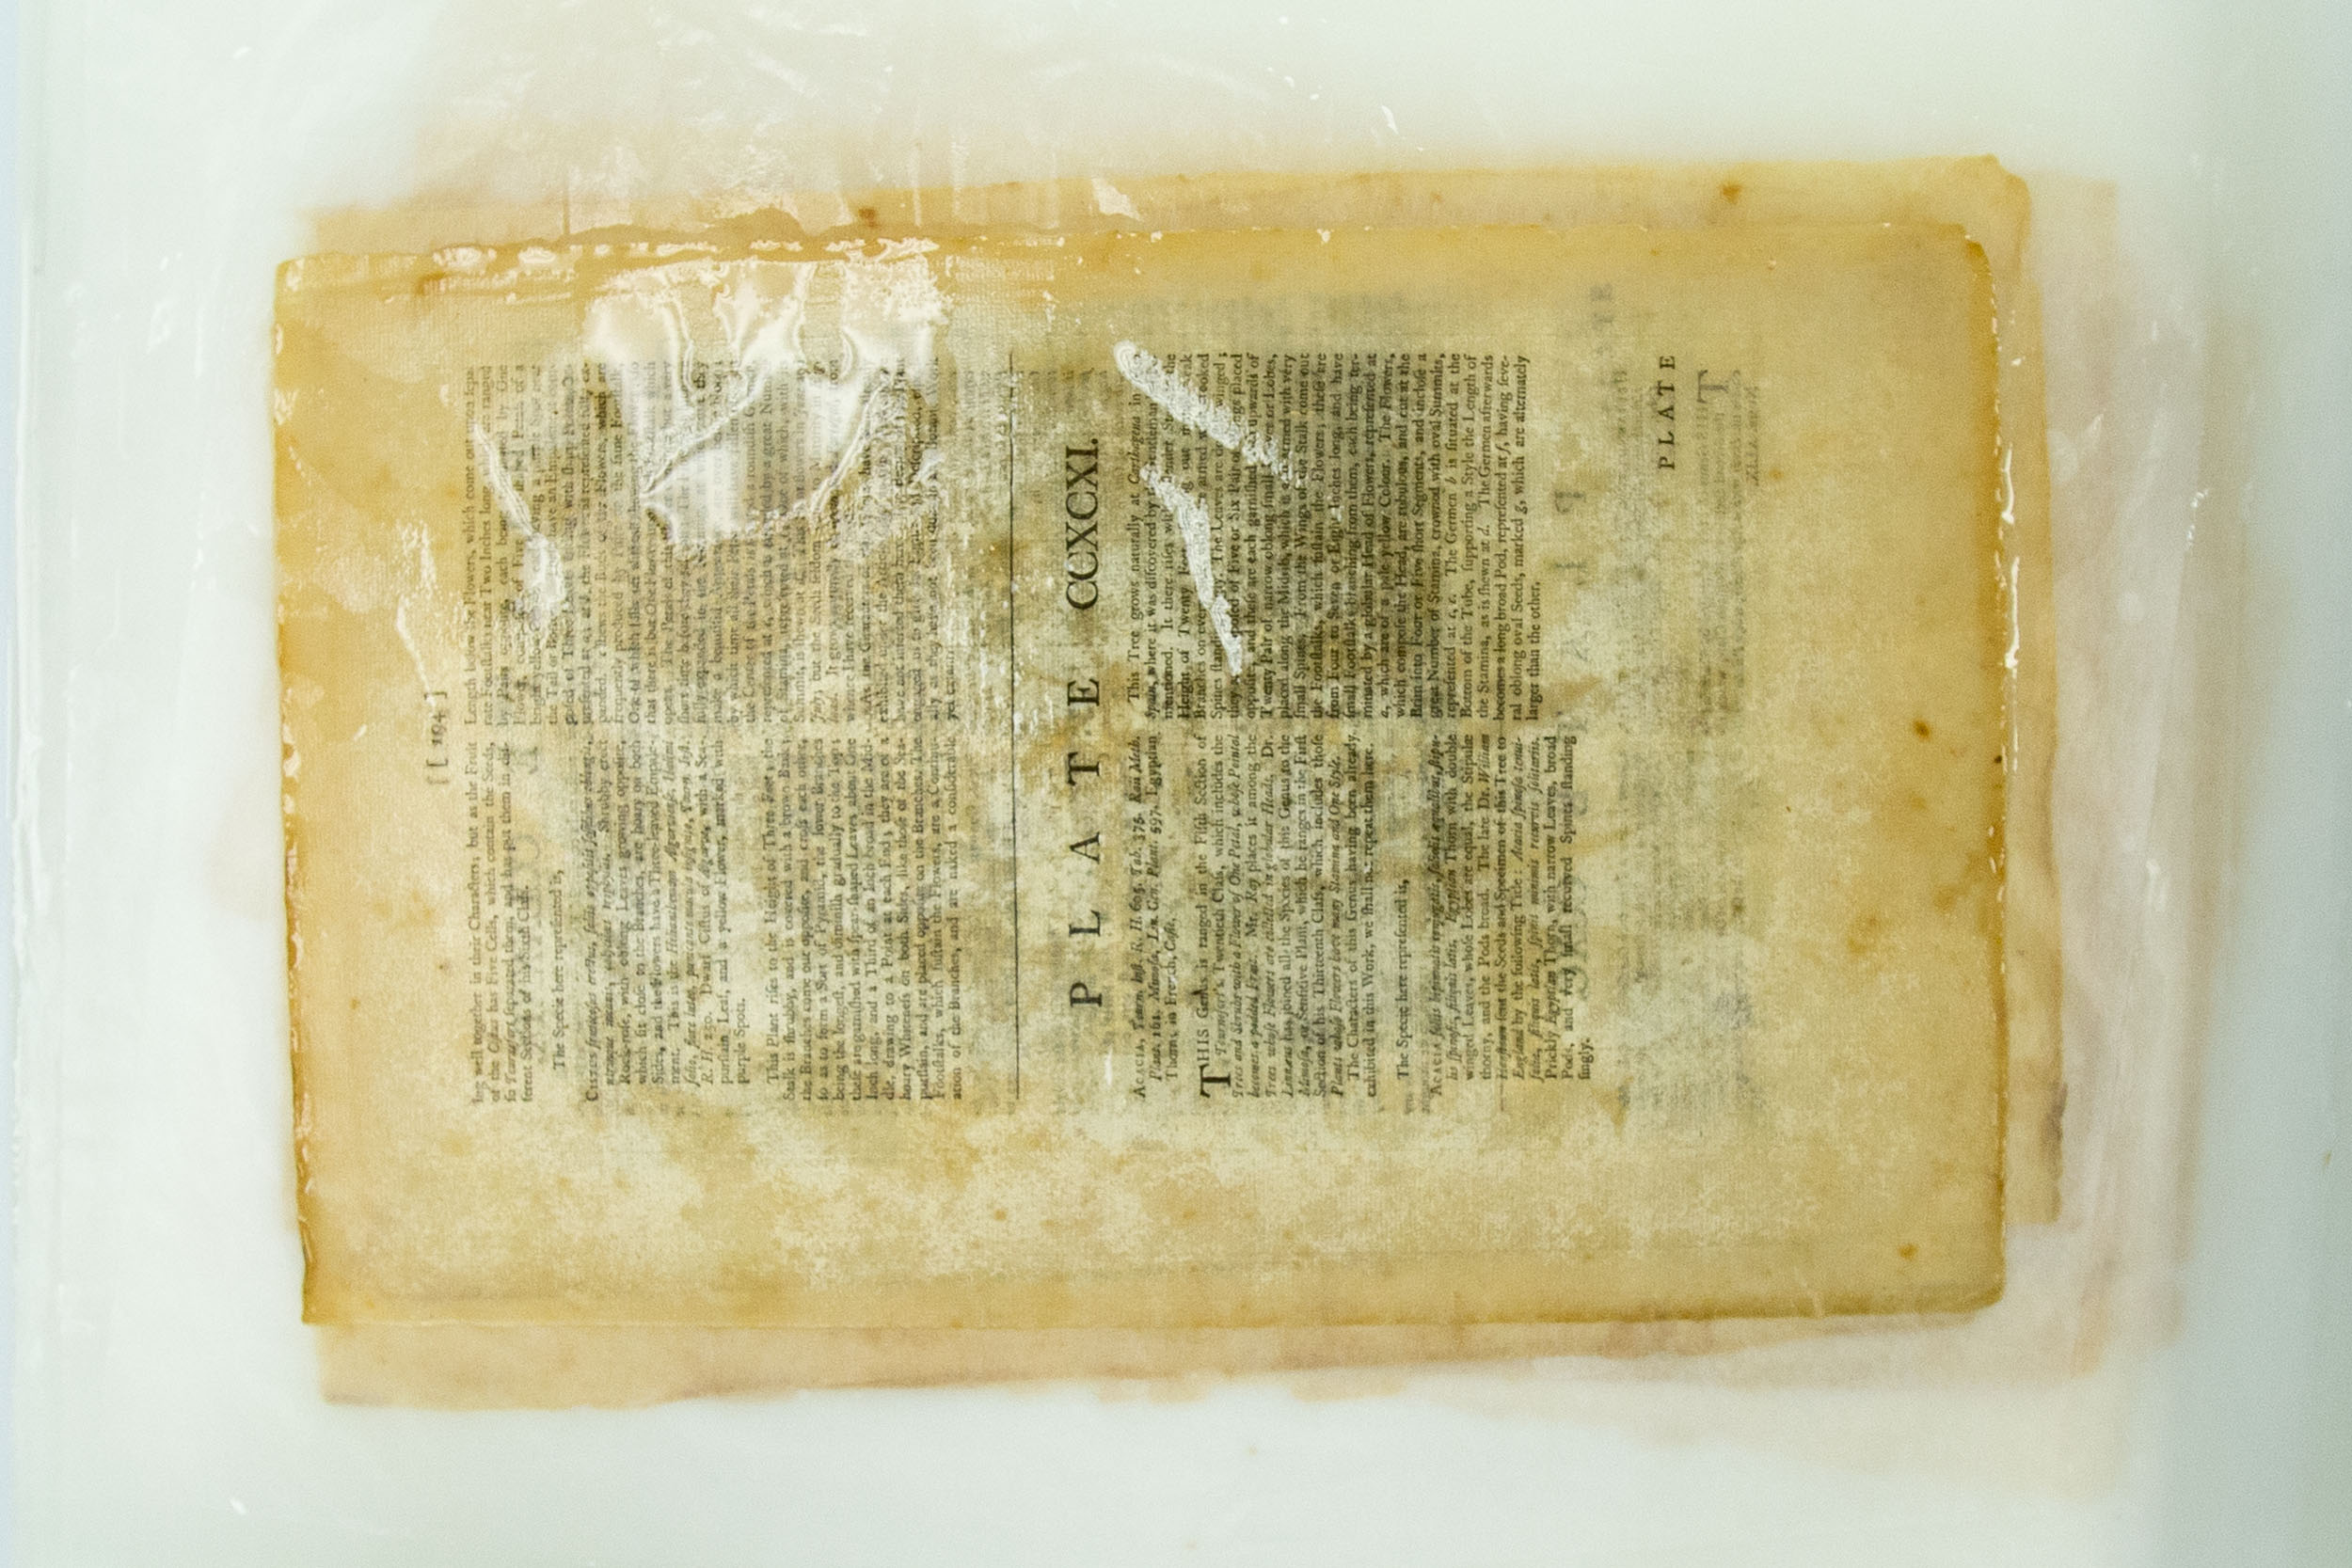 The hardier text pages are stacked and soaked together to remove impurities.